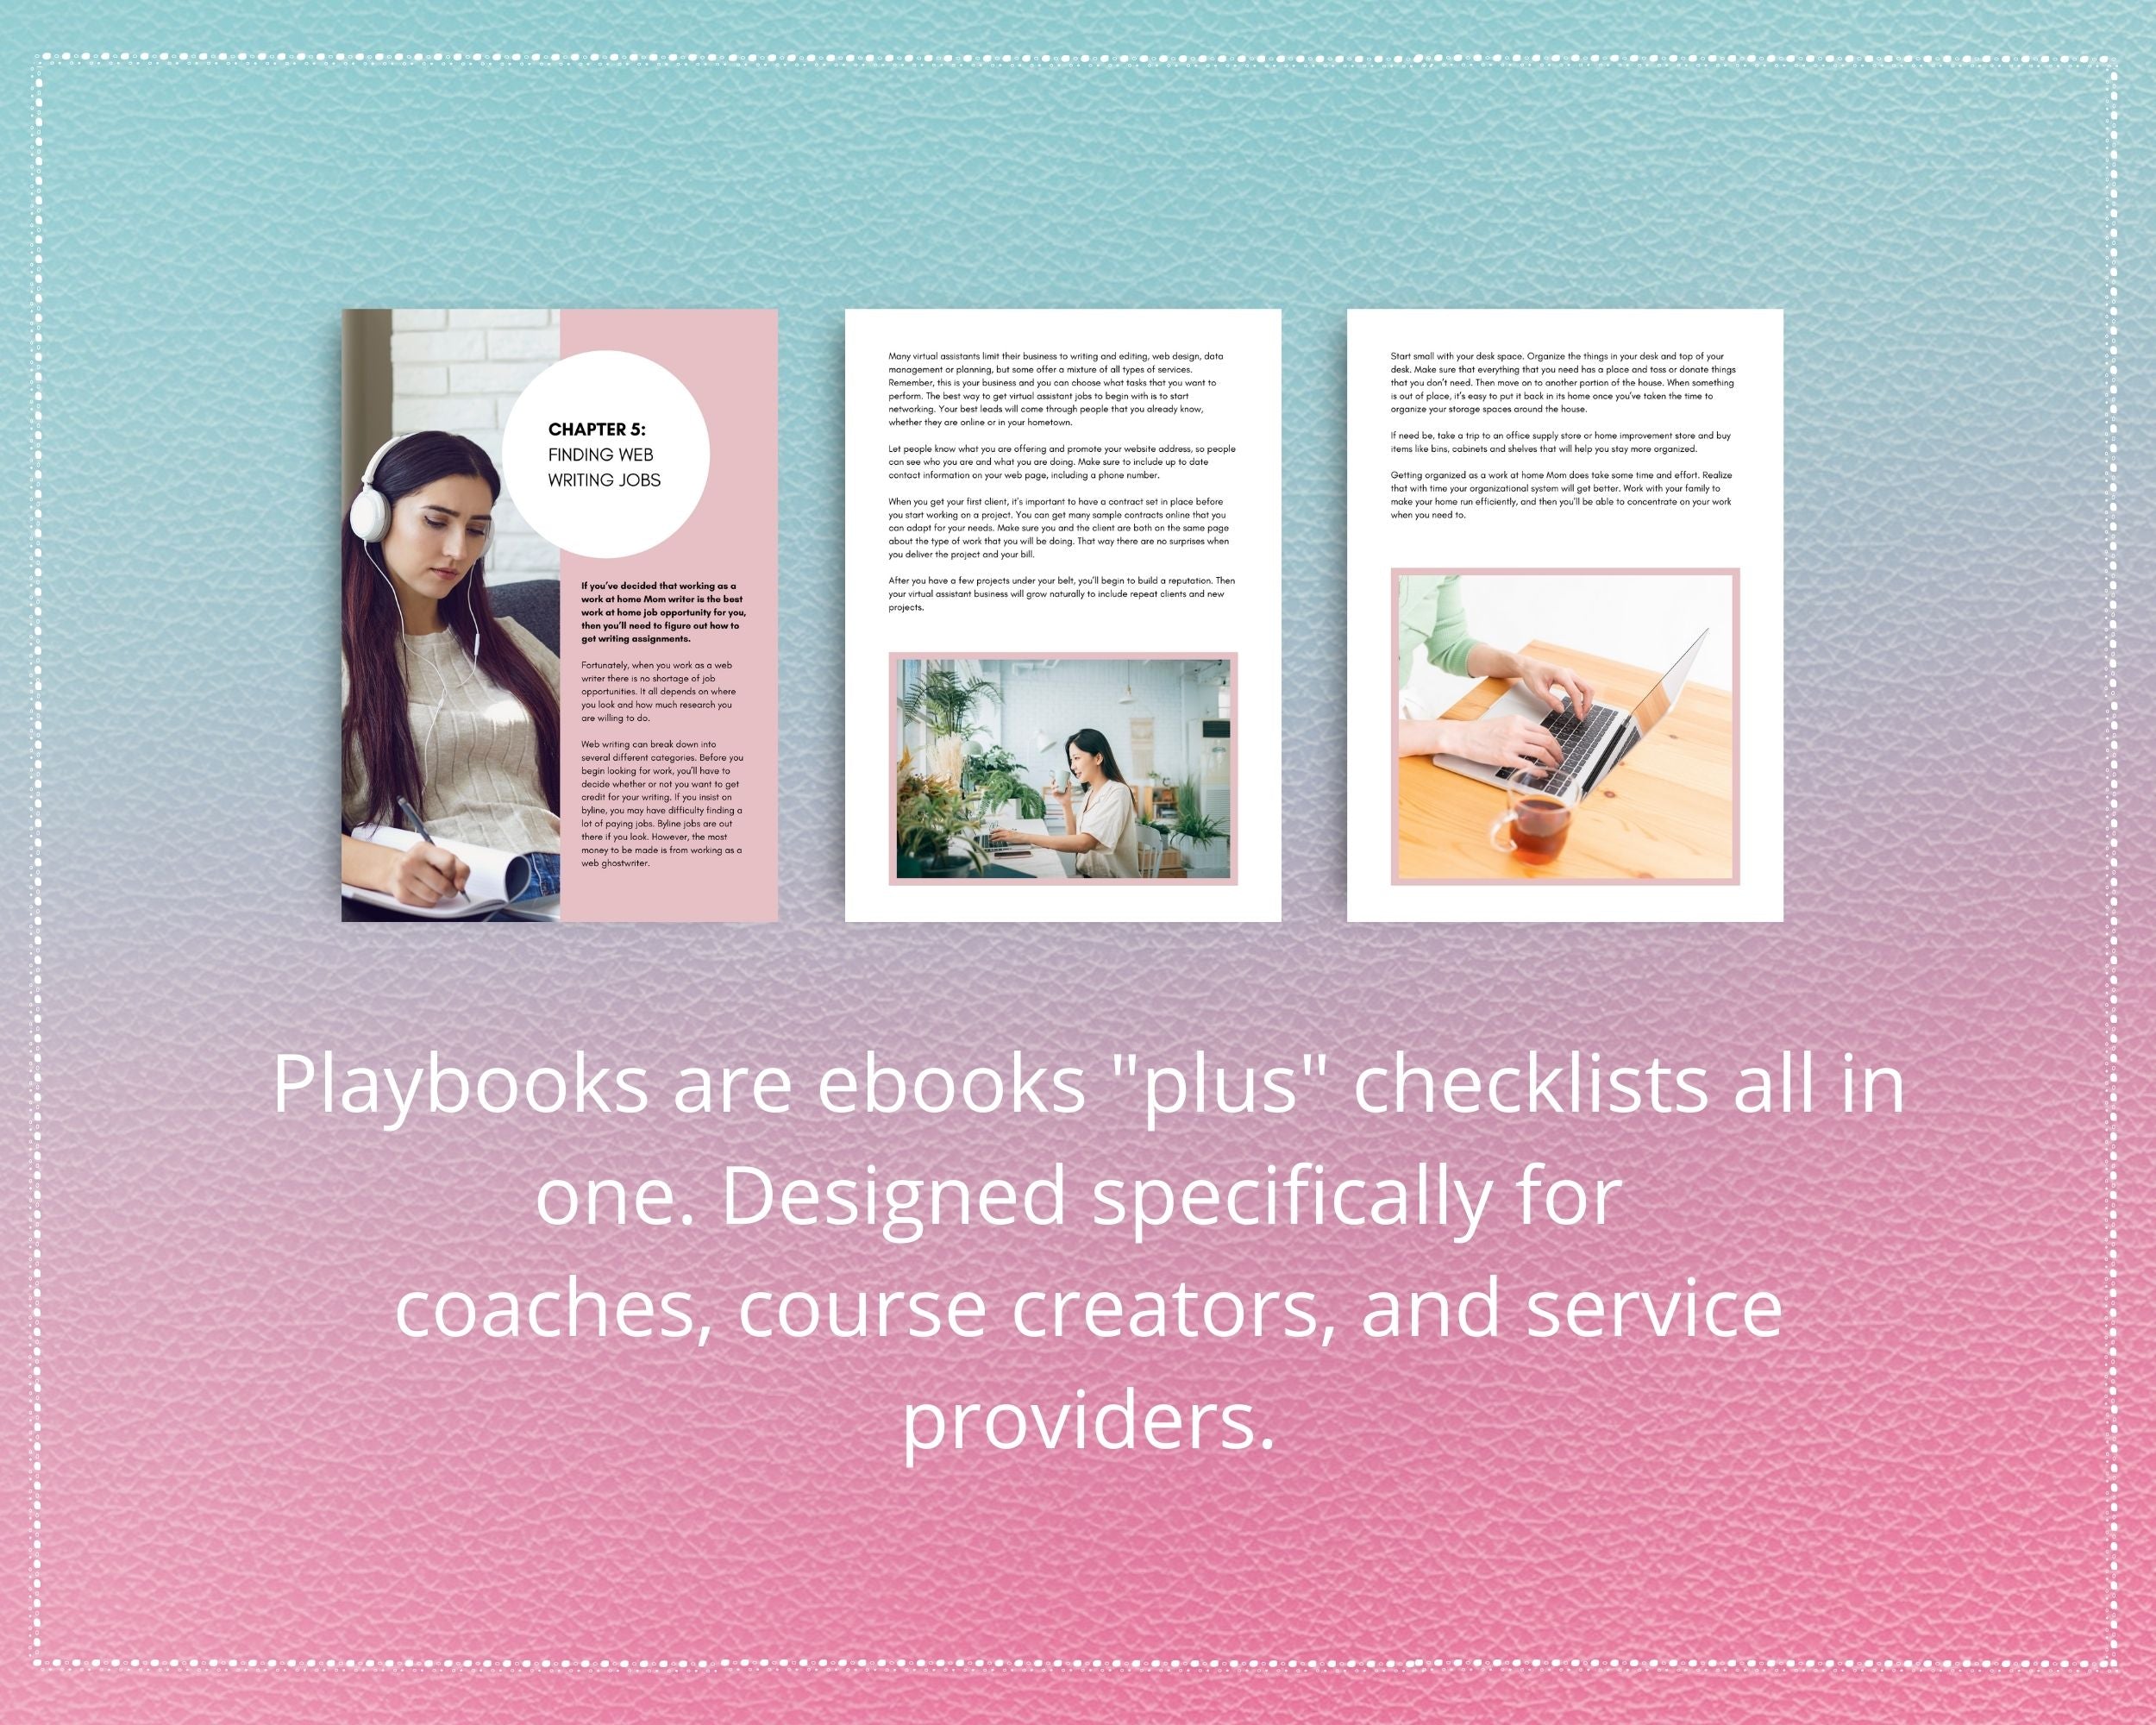 Online Businesses For Moms Playbook in Canva